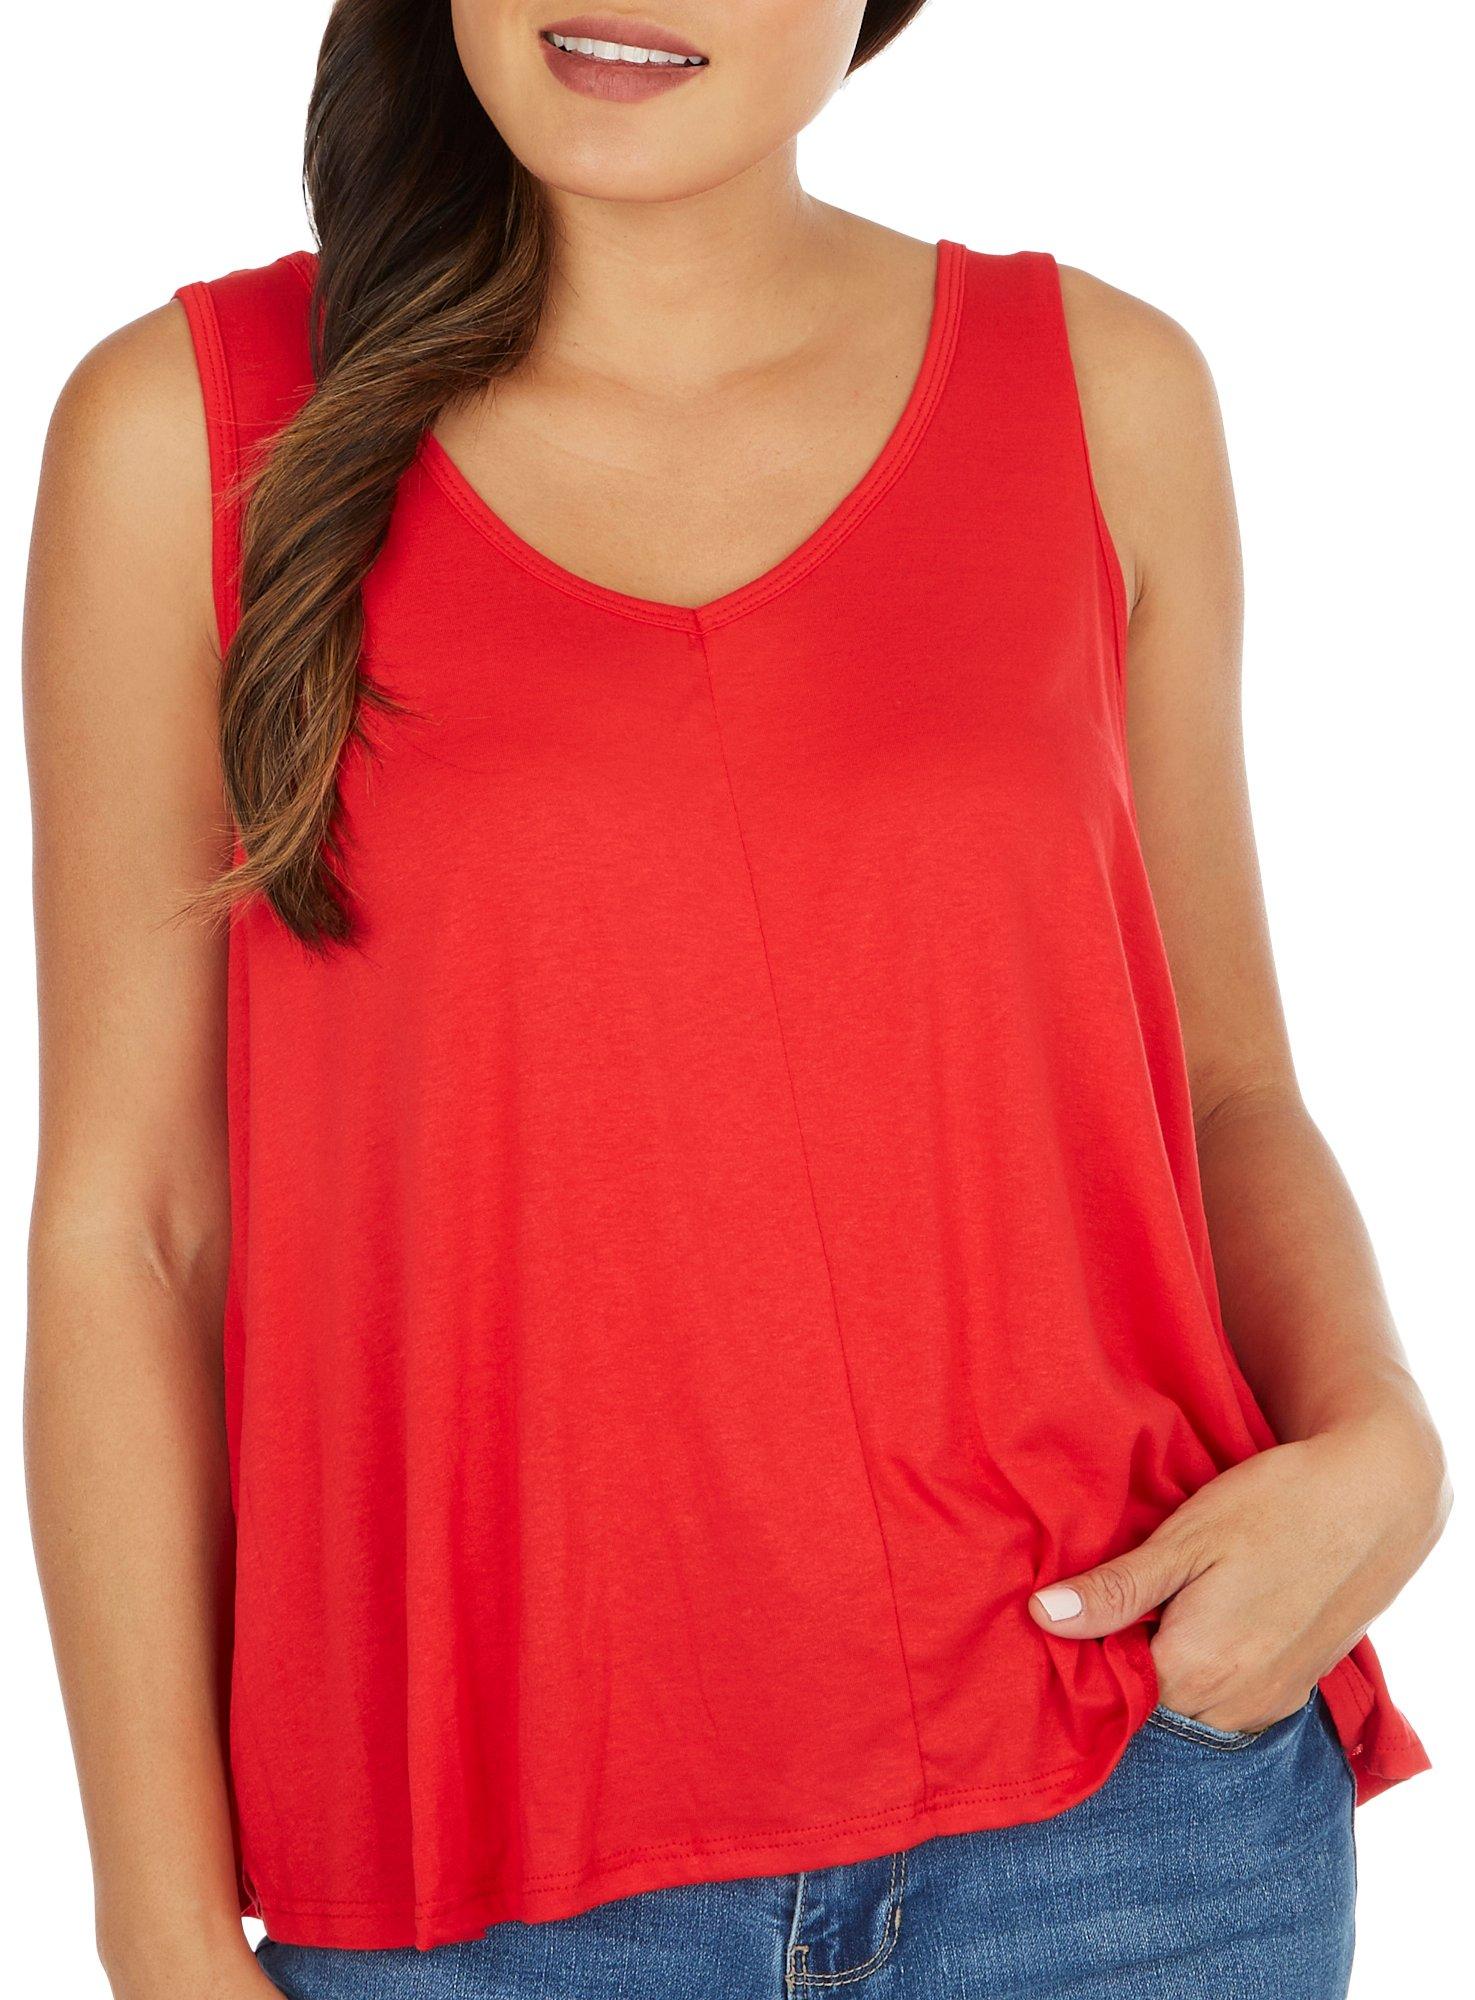 Womens Solid Swing V-Neck Tank Top